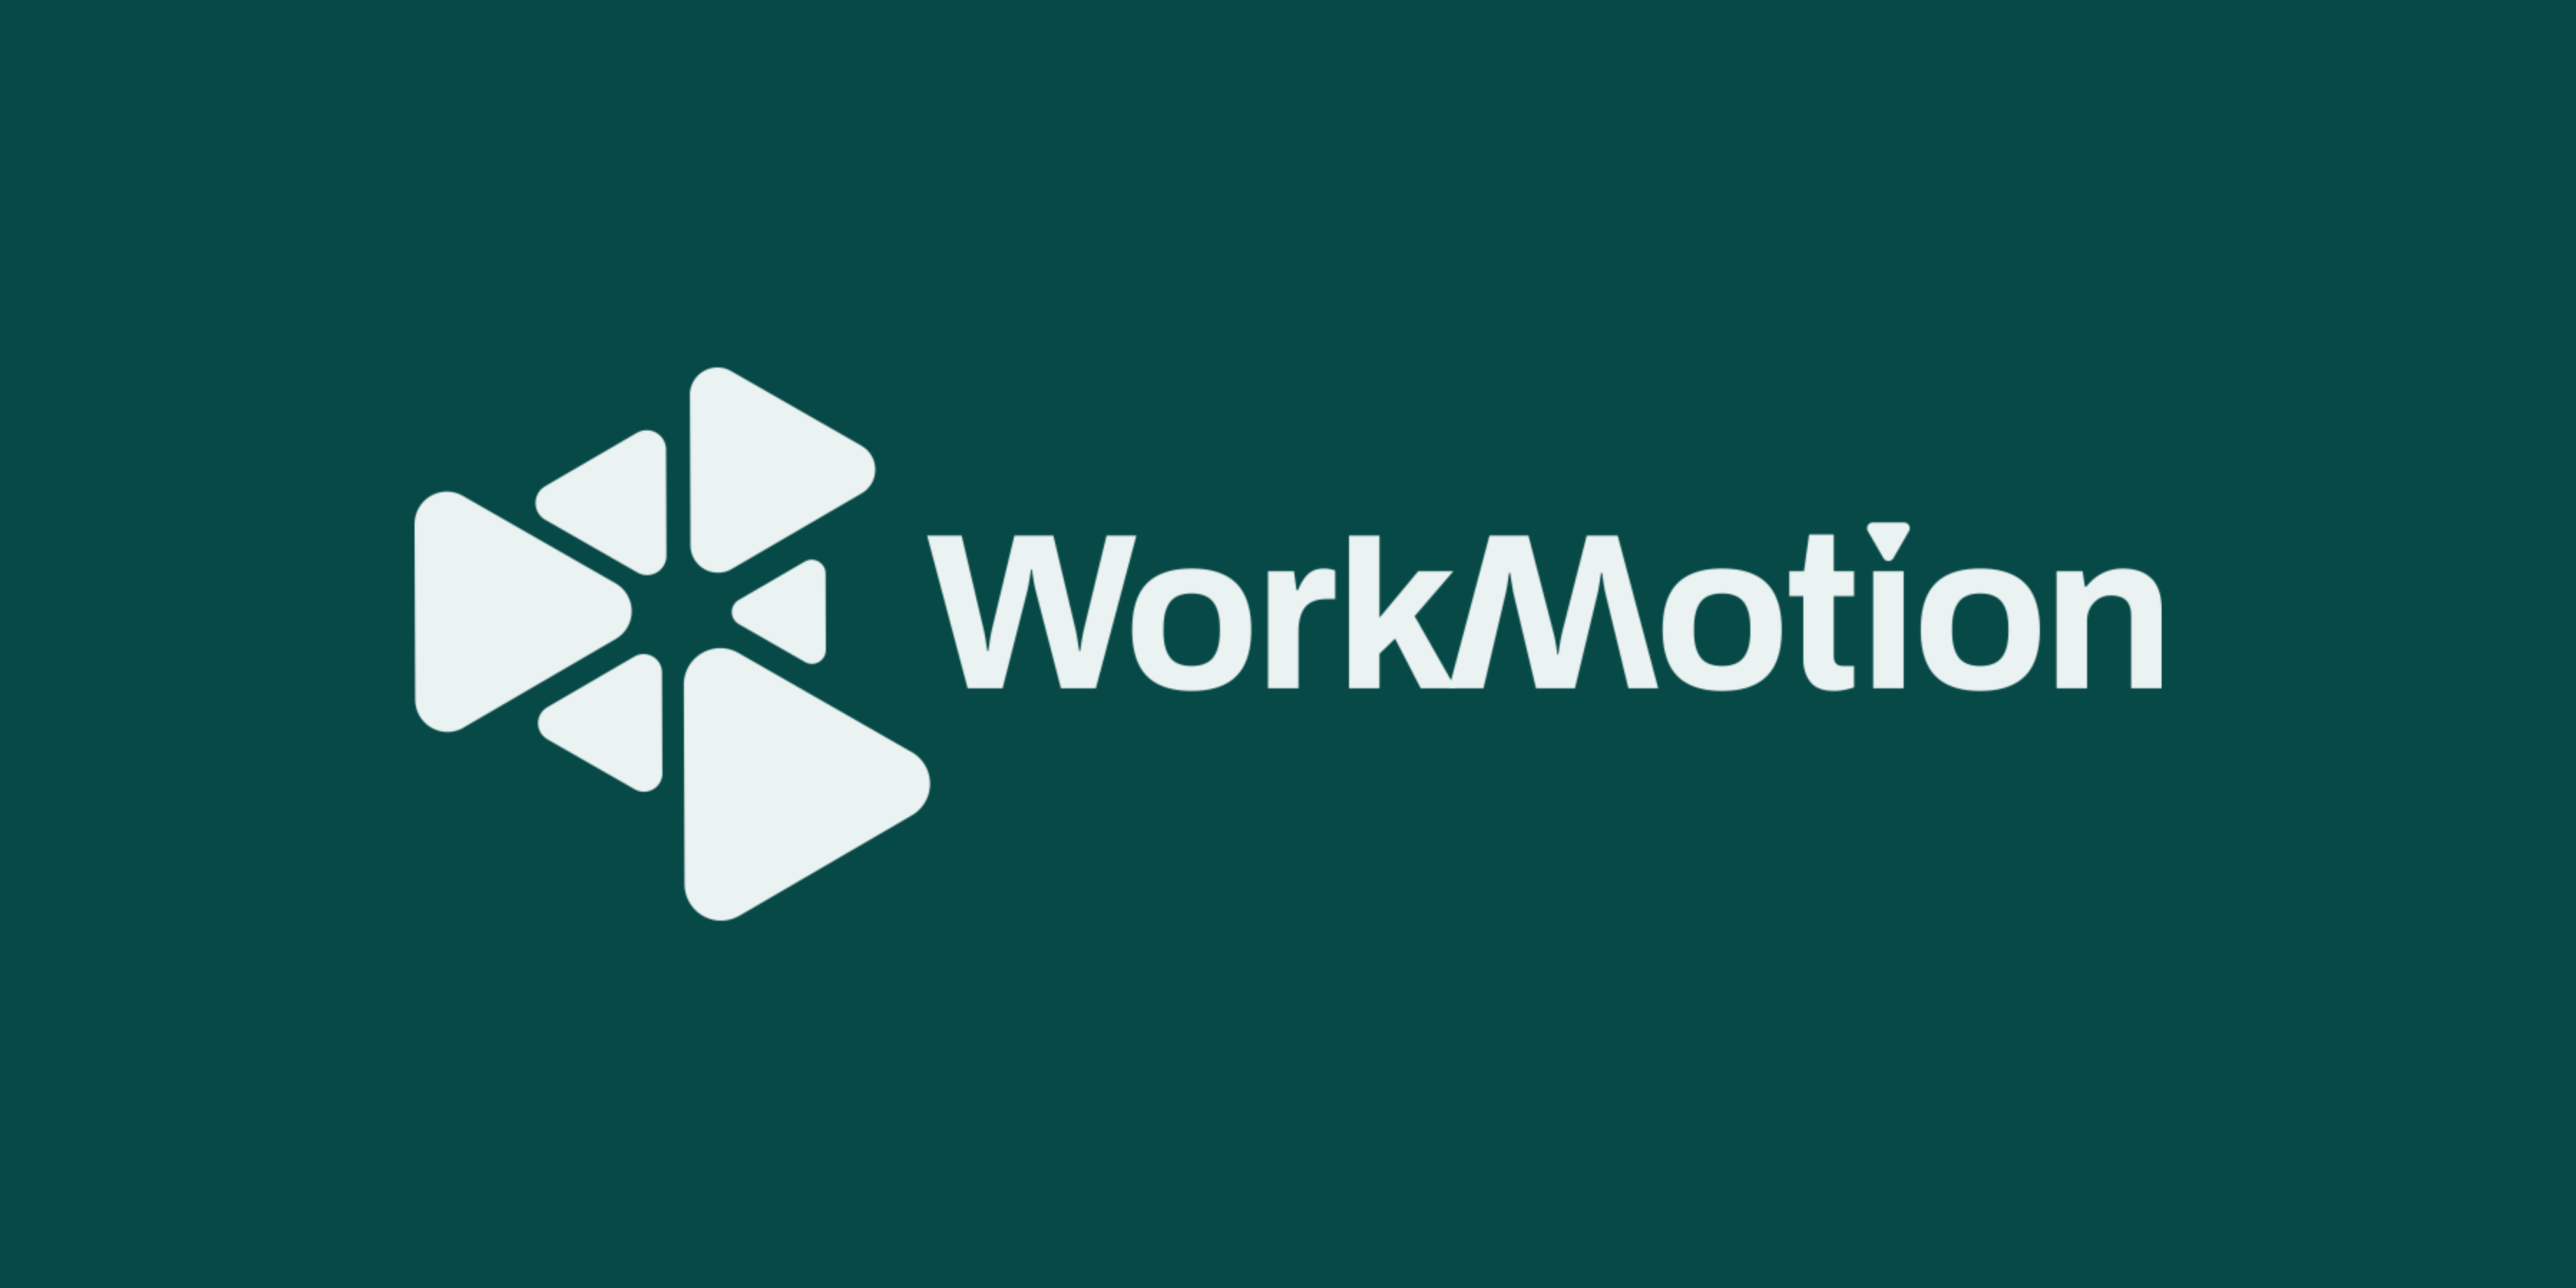 WorkMotion / startup from Berlin / Background